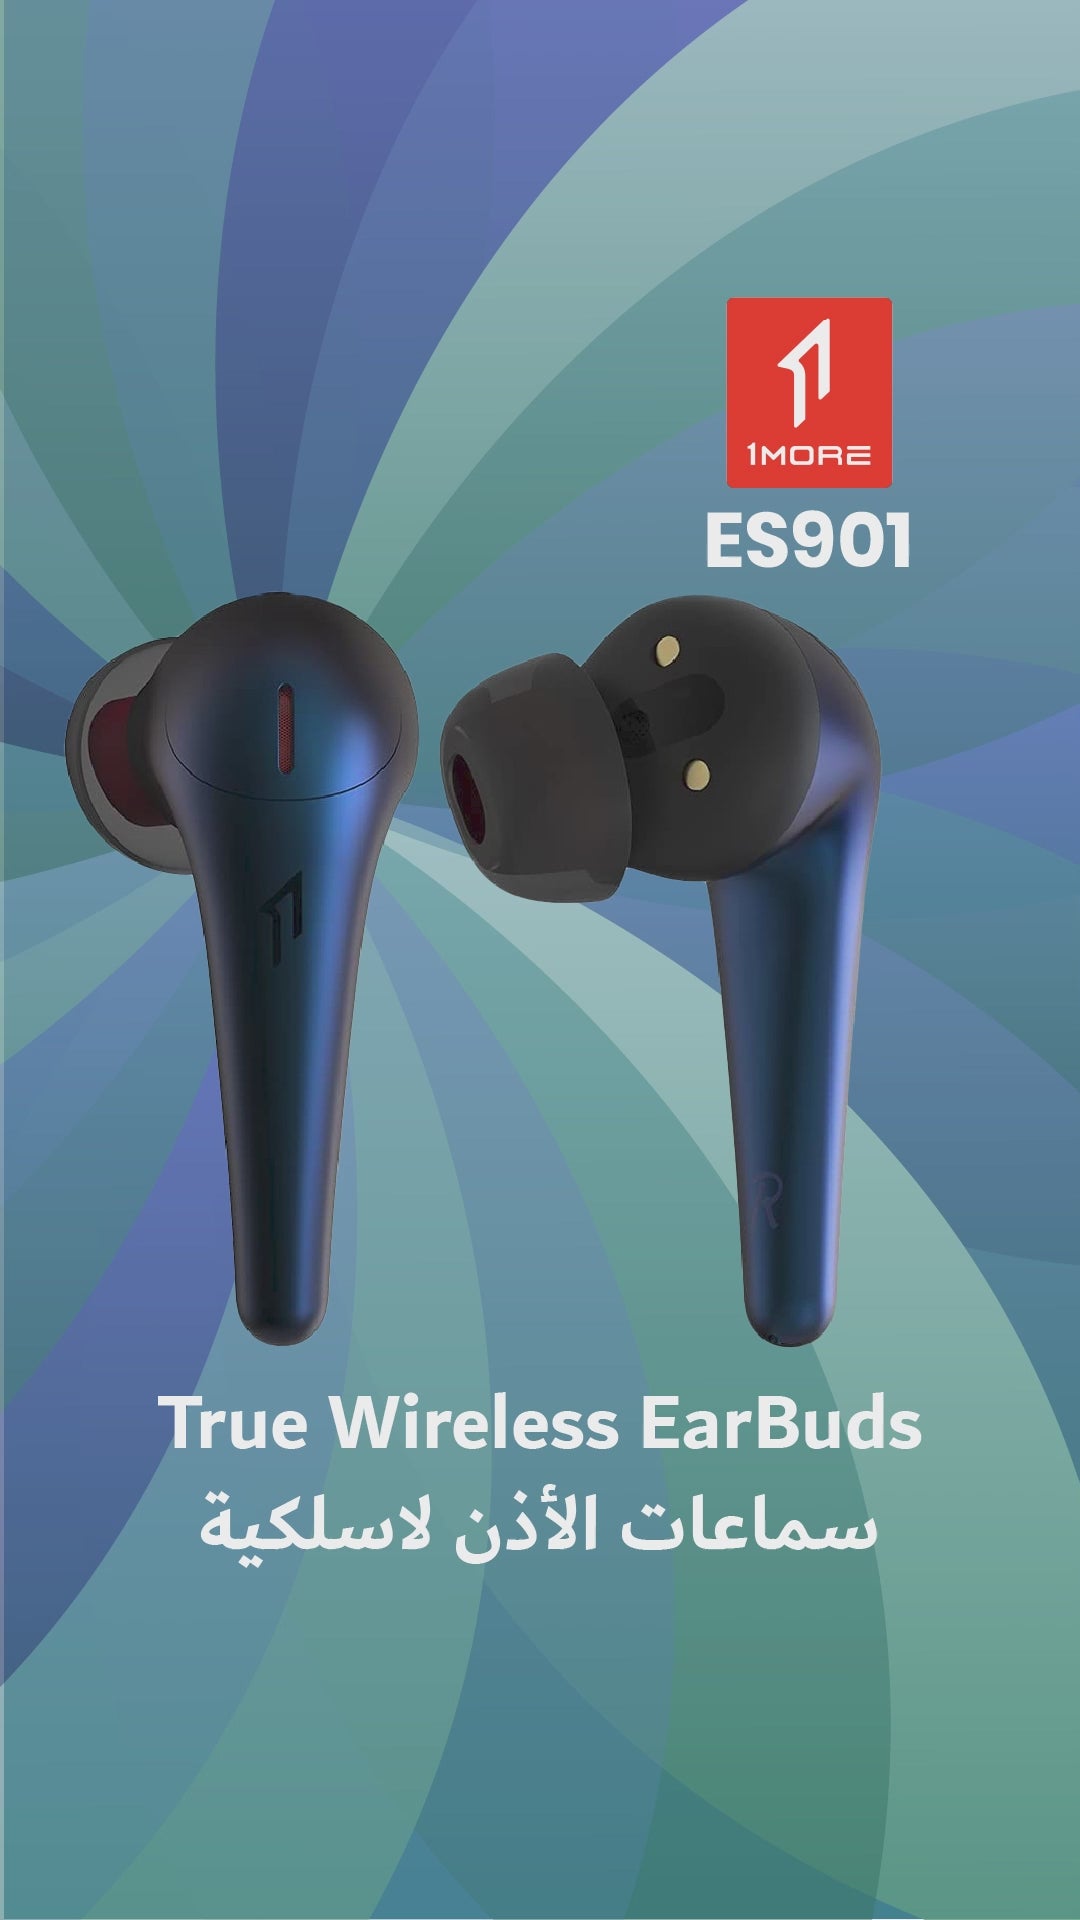 1MORE ES901 ComfoBuds Pro True Wireless EarBuds ANC Modes - Blue